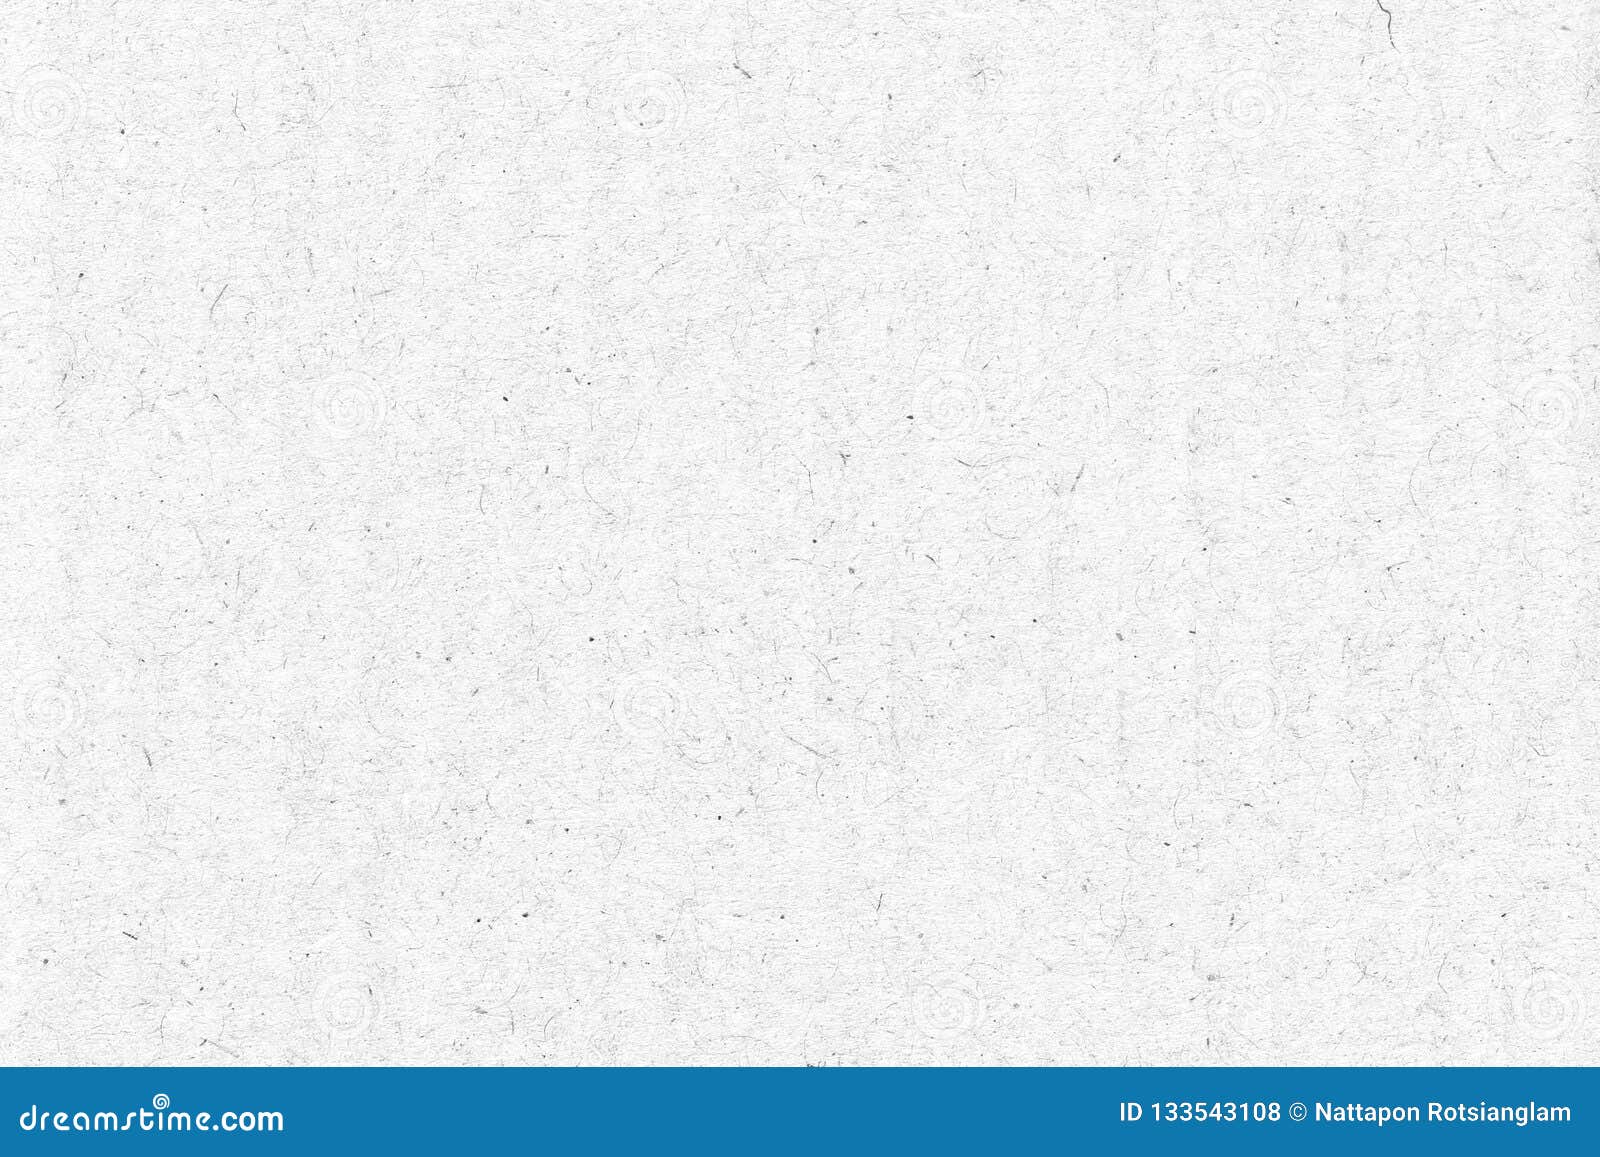 White Craft Paper Texture Background Stock Photo - Image of close